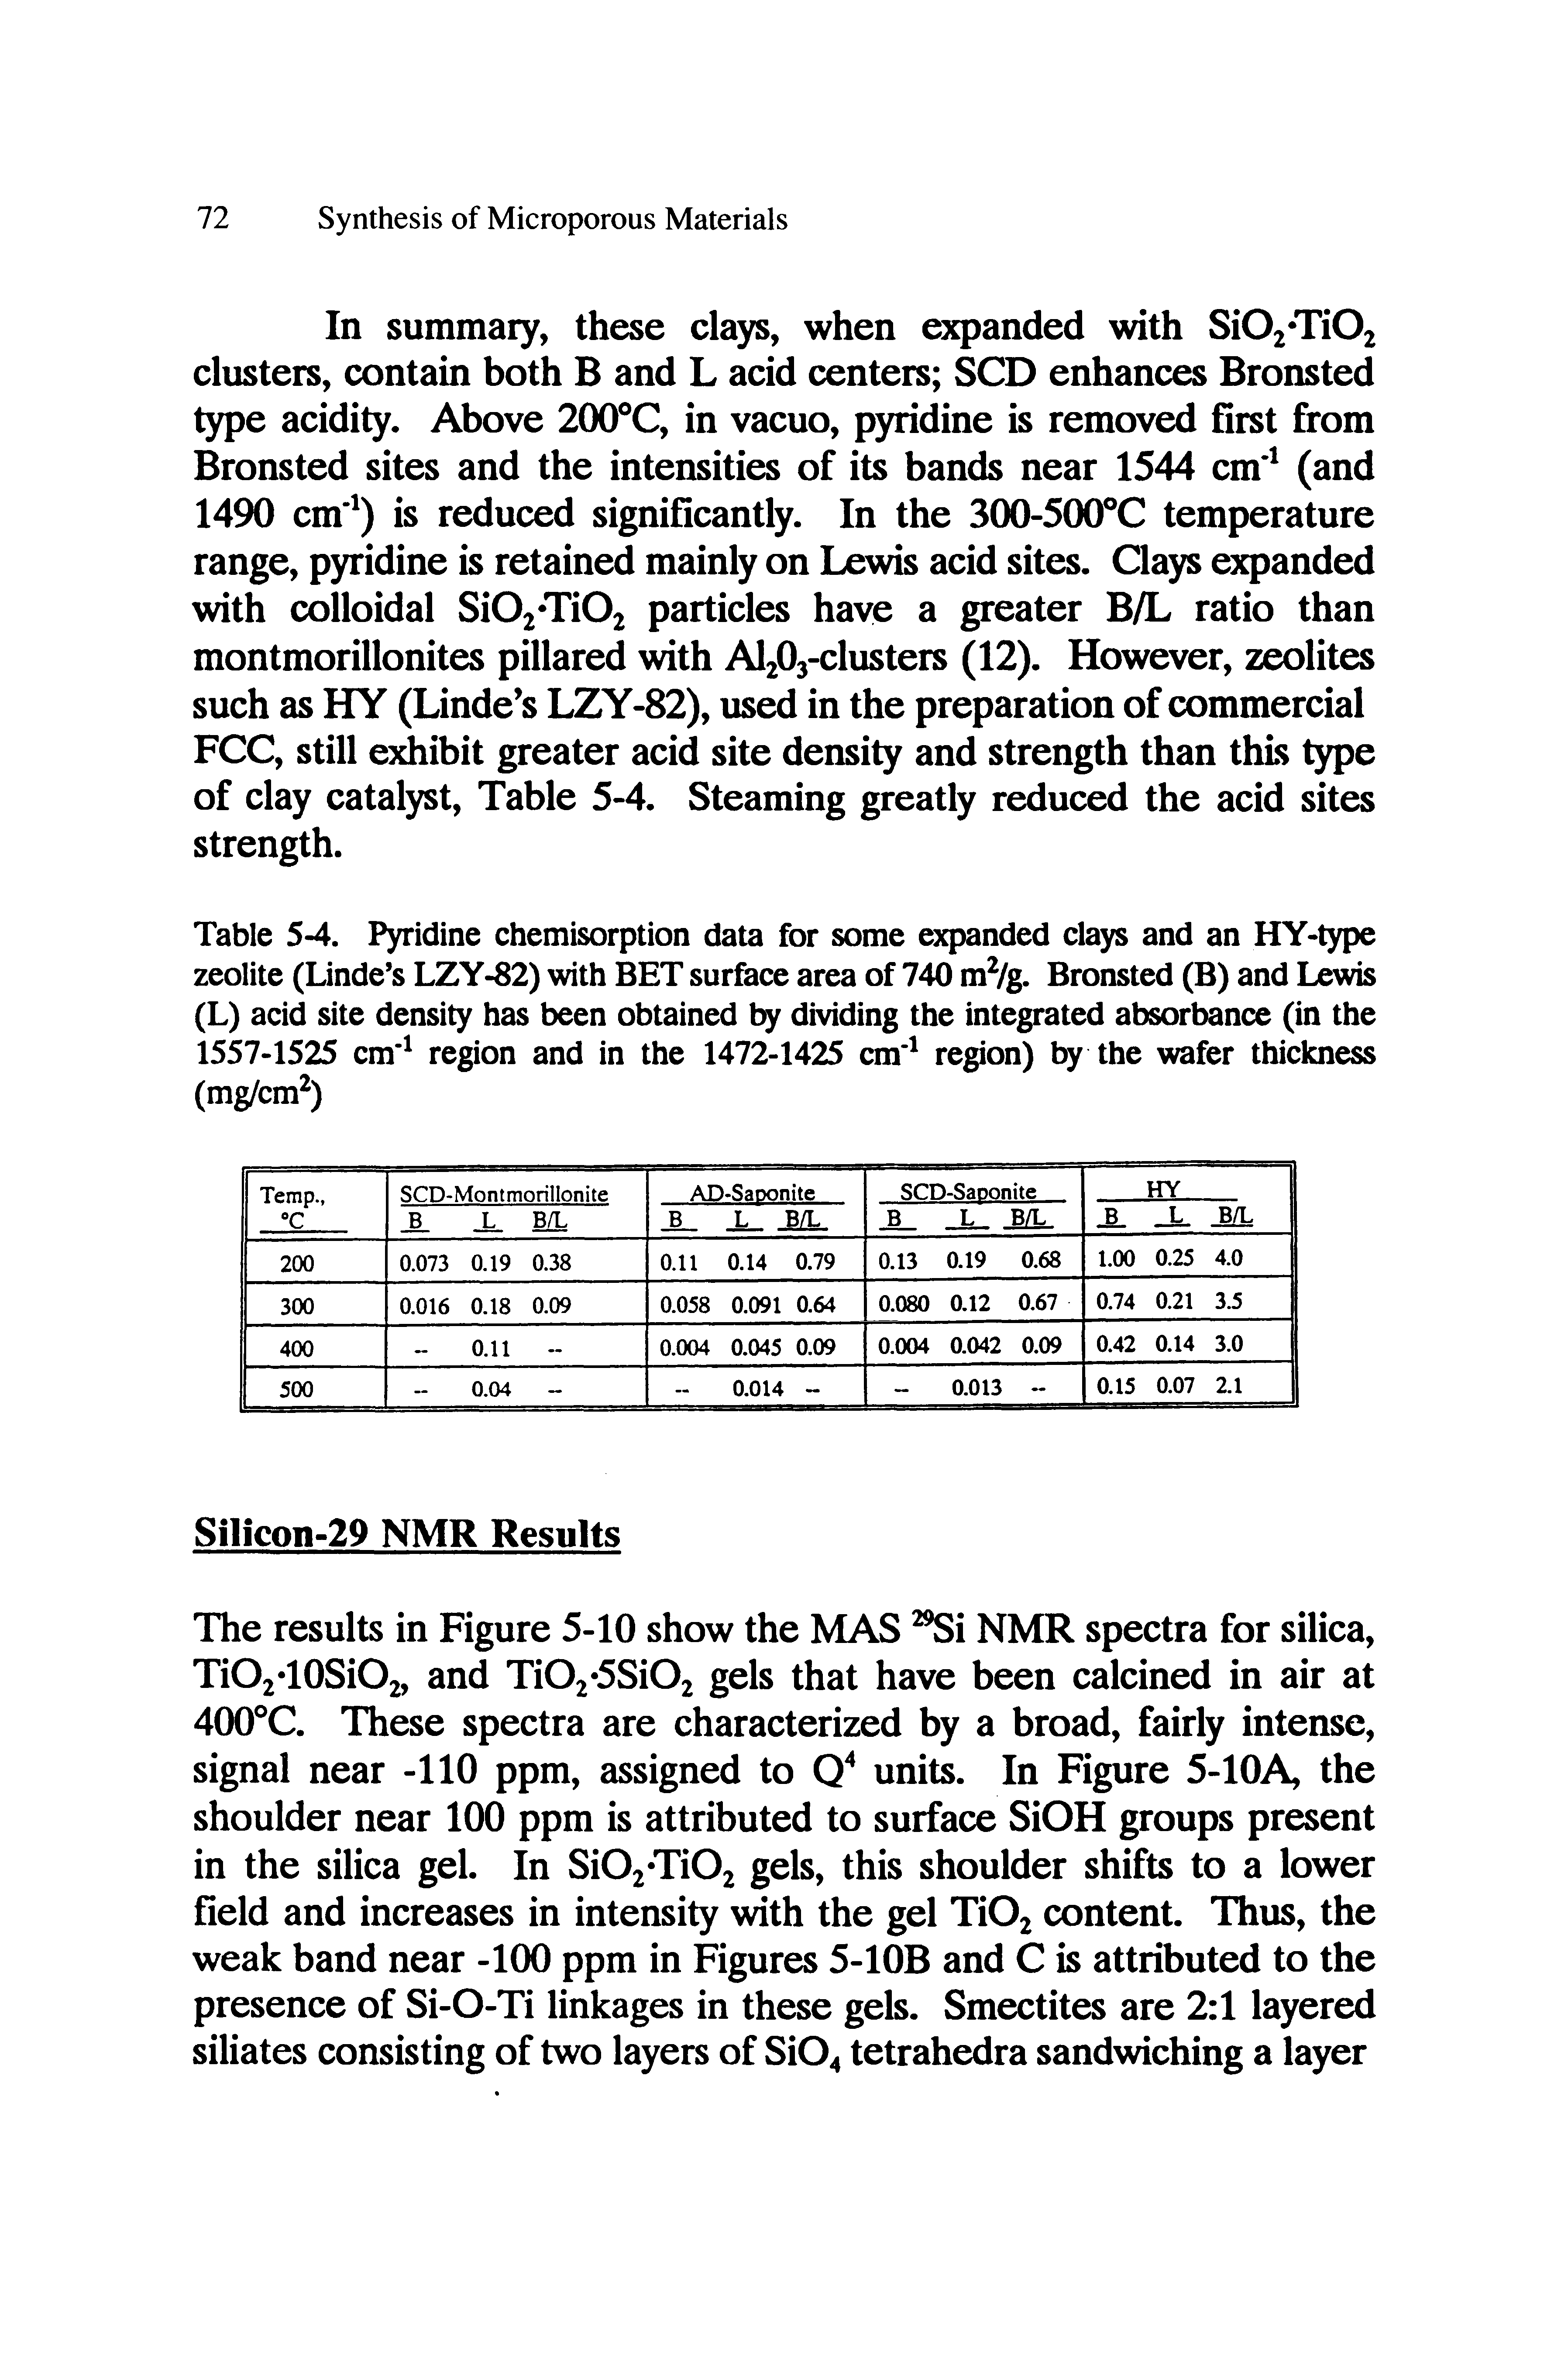 Table 5-4. Pyridine chemisorption data for some expanded clays and an HY-type zeolite (Linde s LZY-82) with BET surface area of 740 mVg. Bronsted (B) and Le (L) acid site density has been obtained by dividing the integrated absorbance (in the 1557-1525 cm region and in the 1472-1425 cm region) by the wafer thickness (mg/cm )...